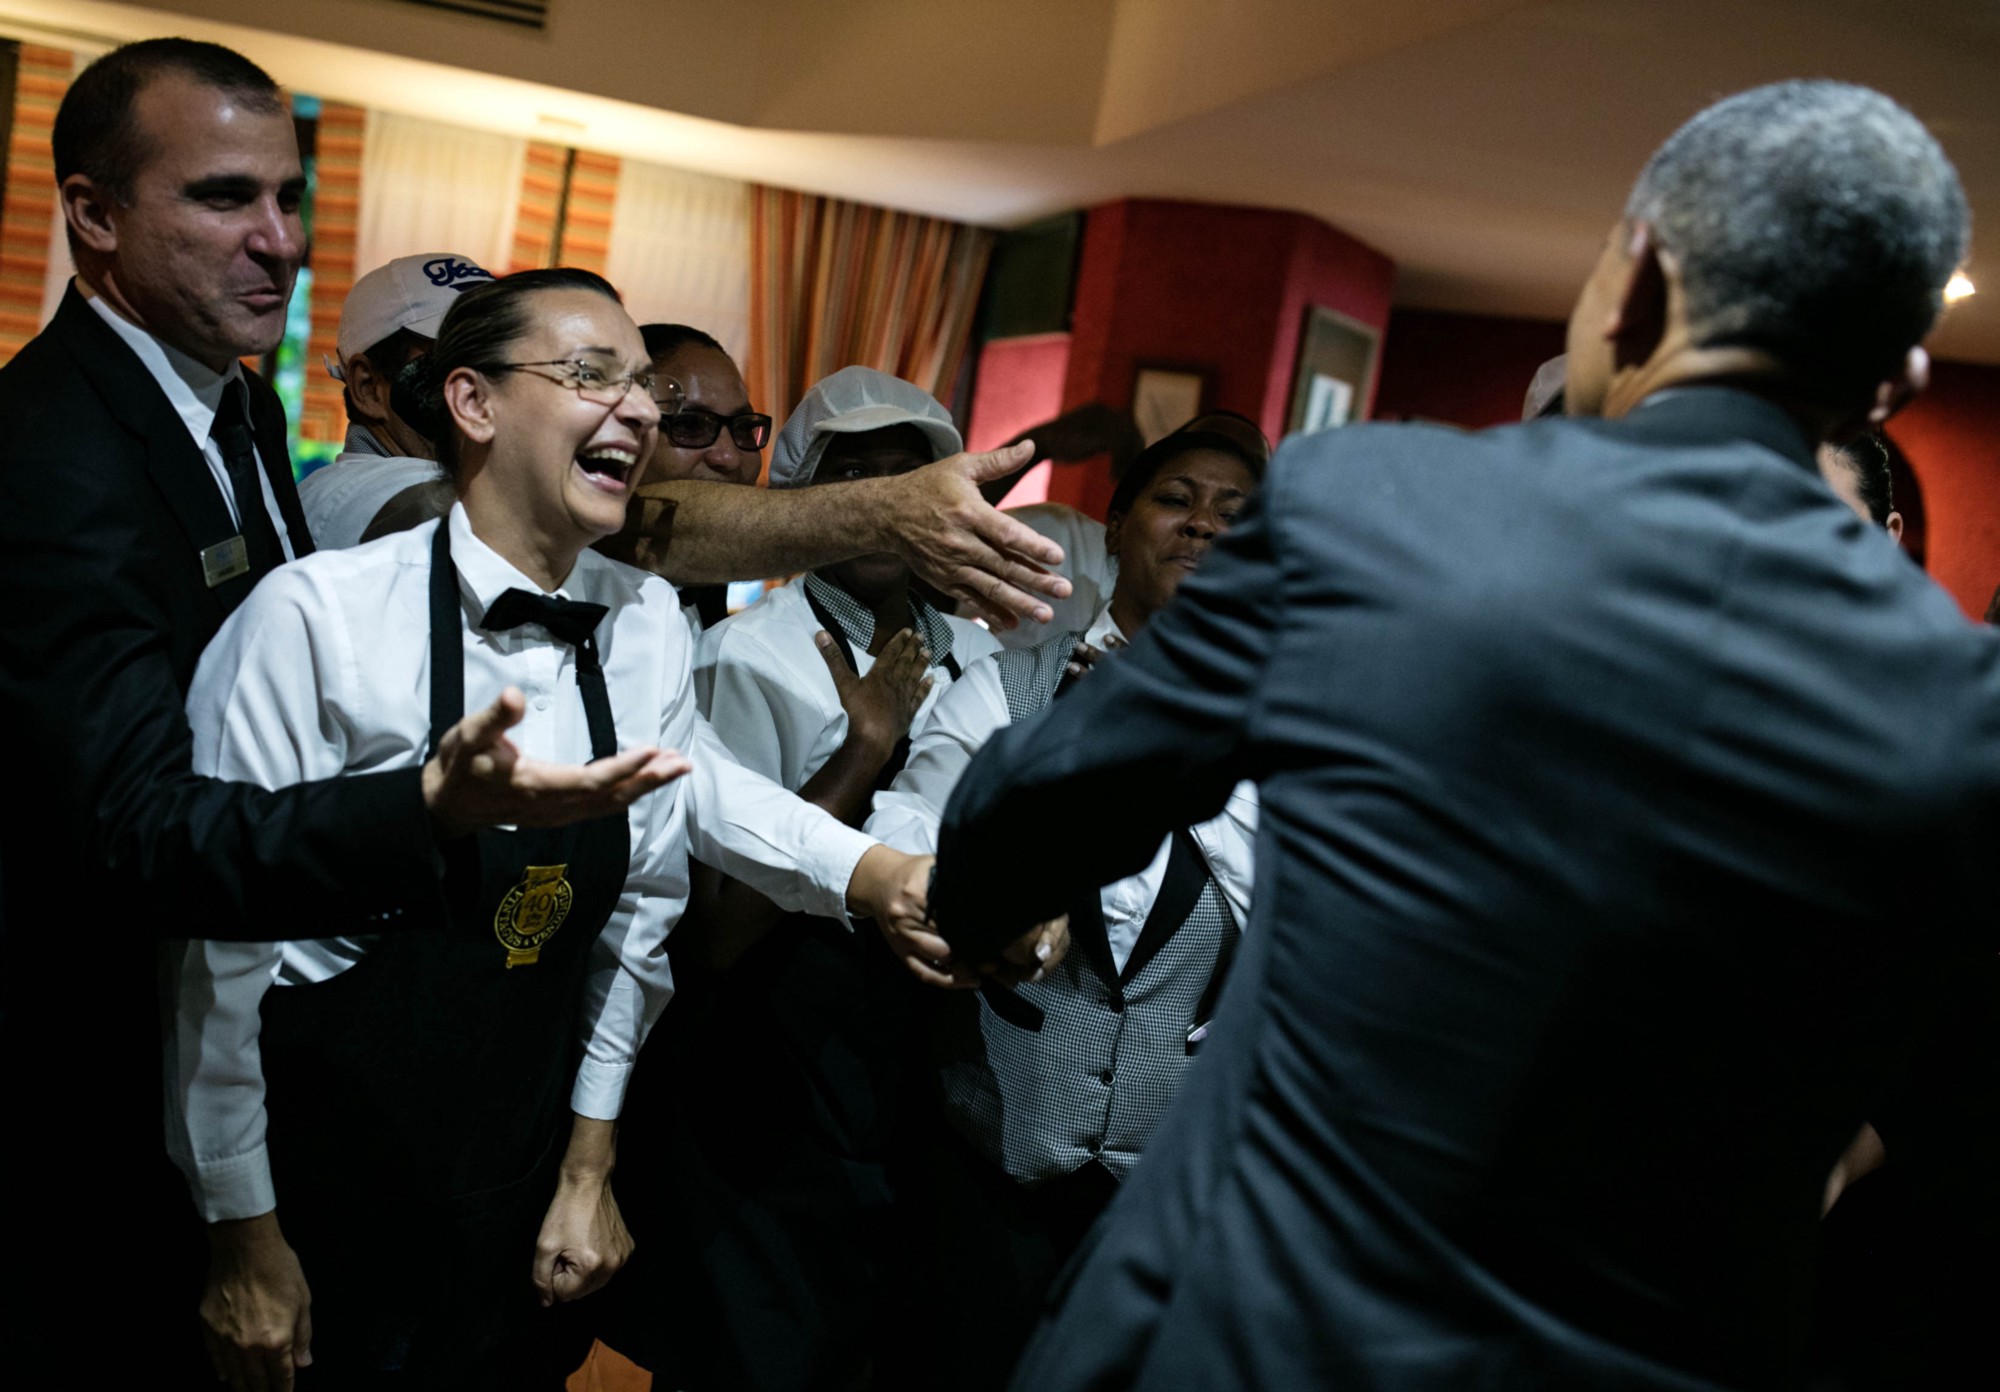 President Barack Obama greets hotel workers in Havana, Cuba, Sunday, March 20, 2016. (Official White House Photo by Pete Souza)